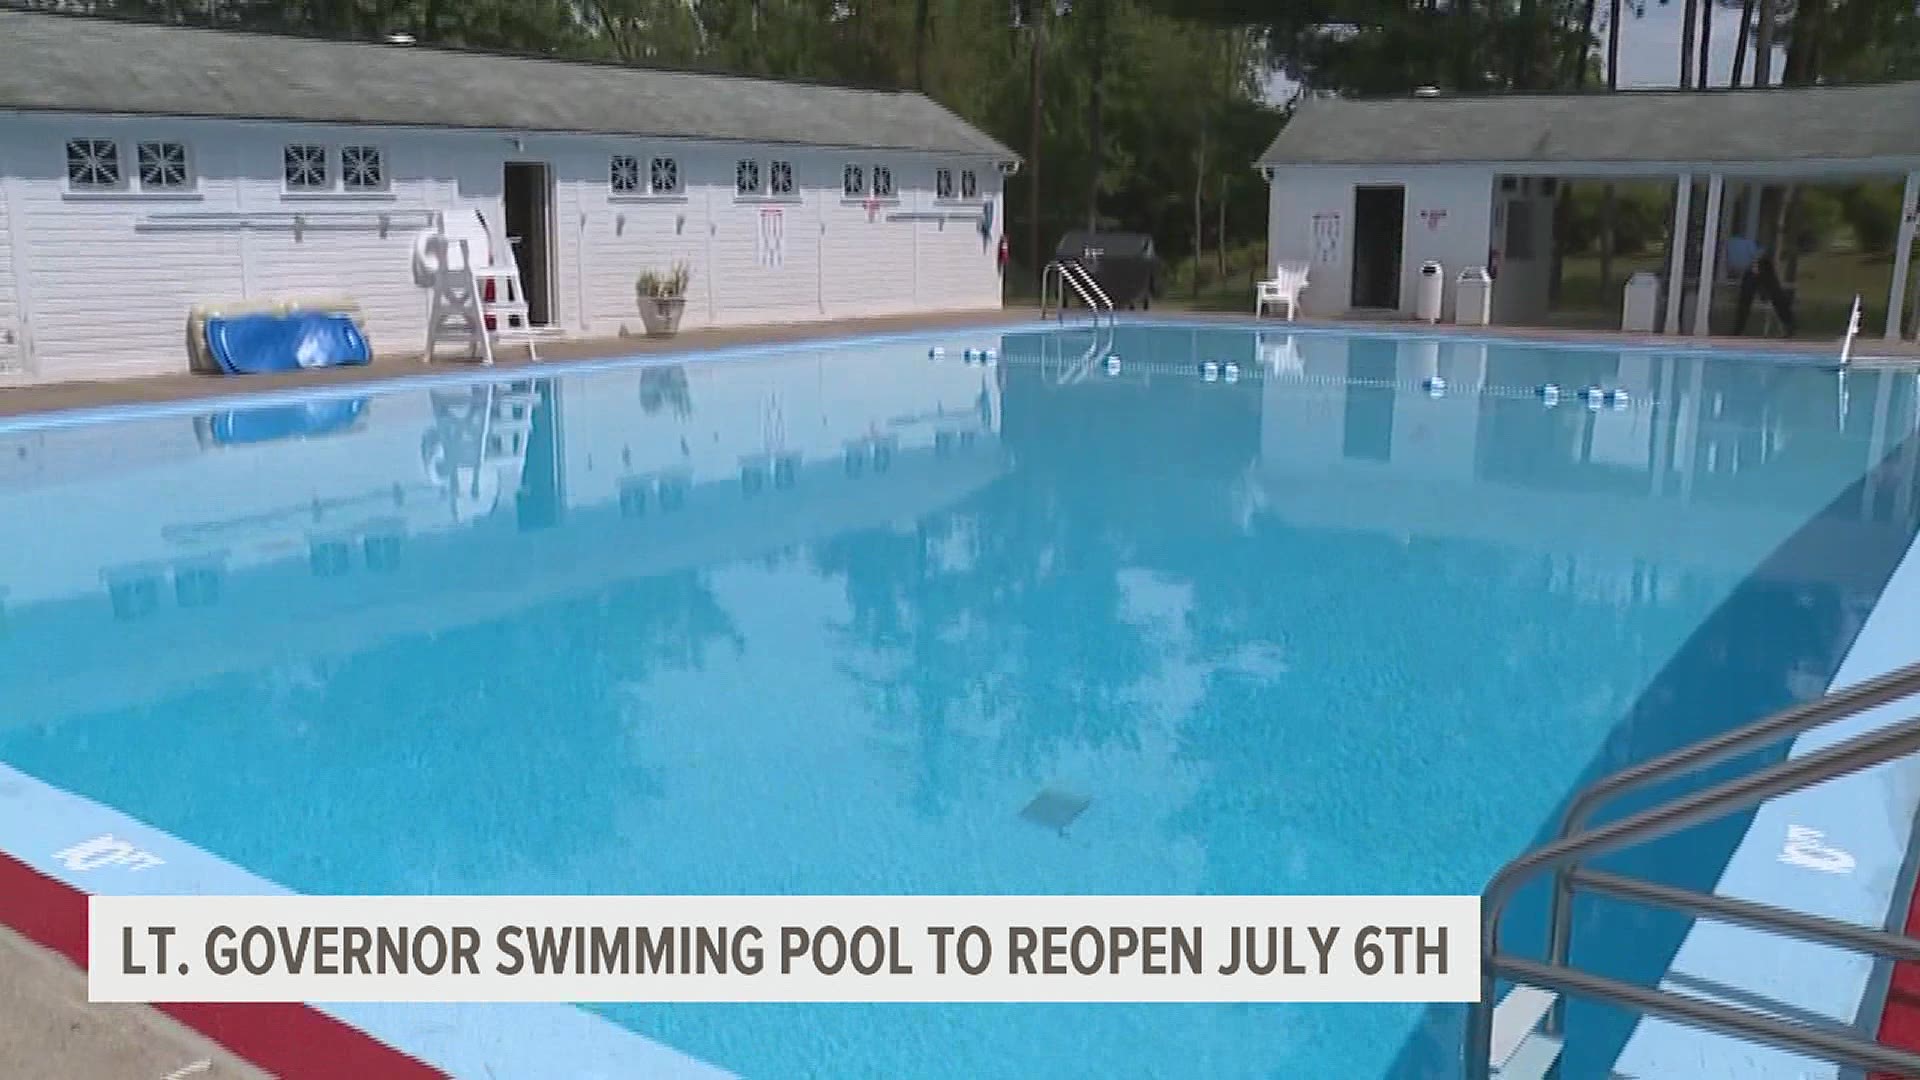 The pool at the residence will reopen for public groups and nonprofits that serve children who might not otherwise have the opportunity to swim.